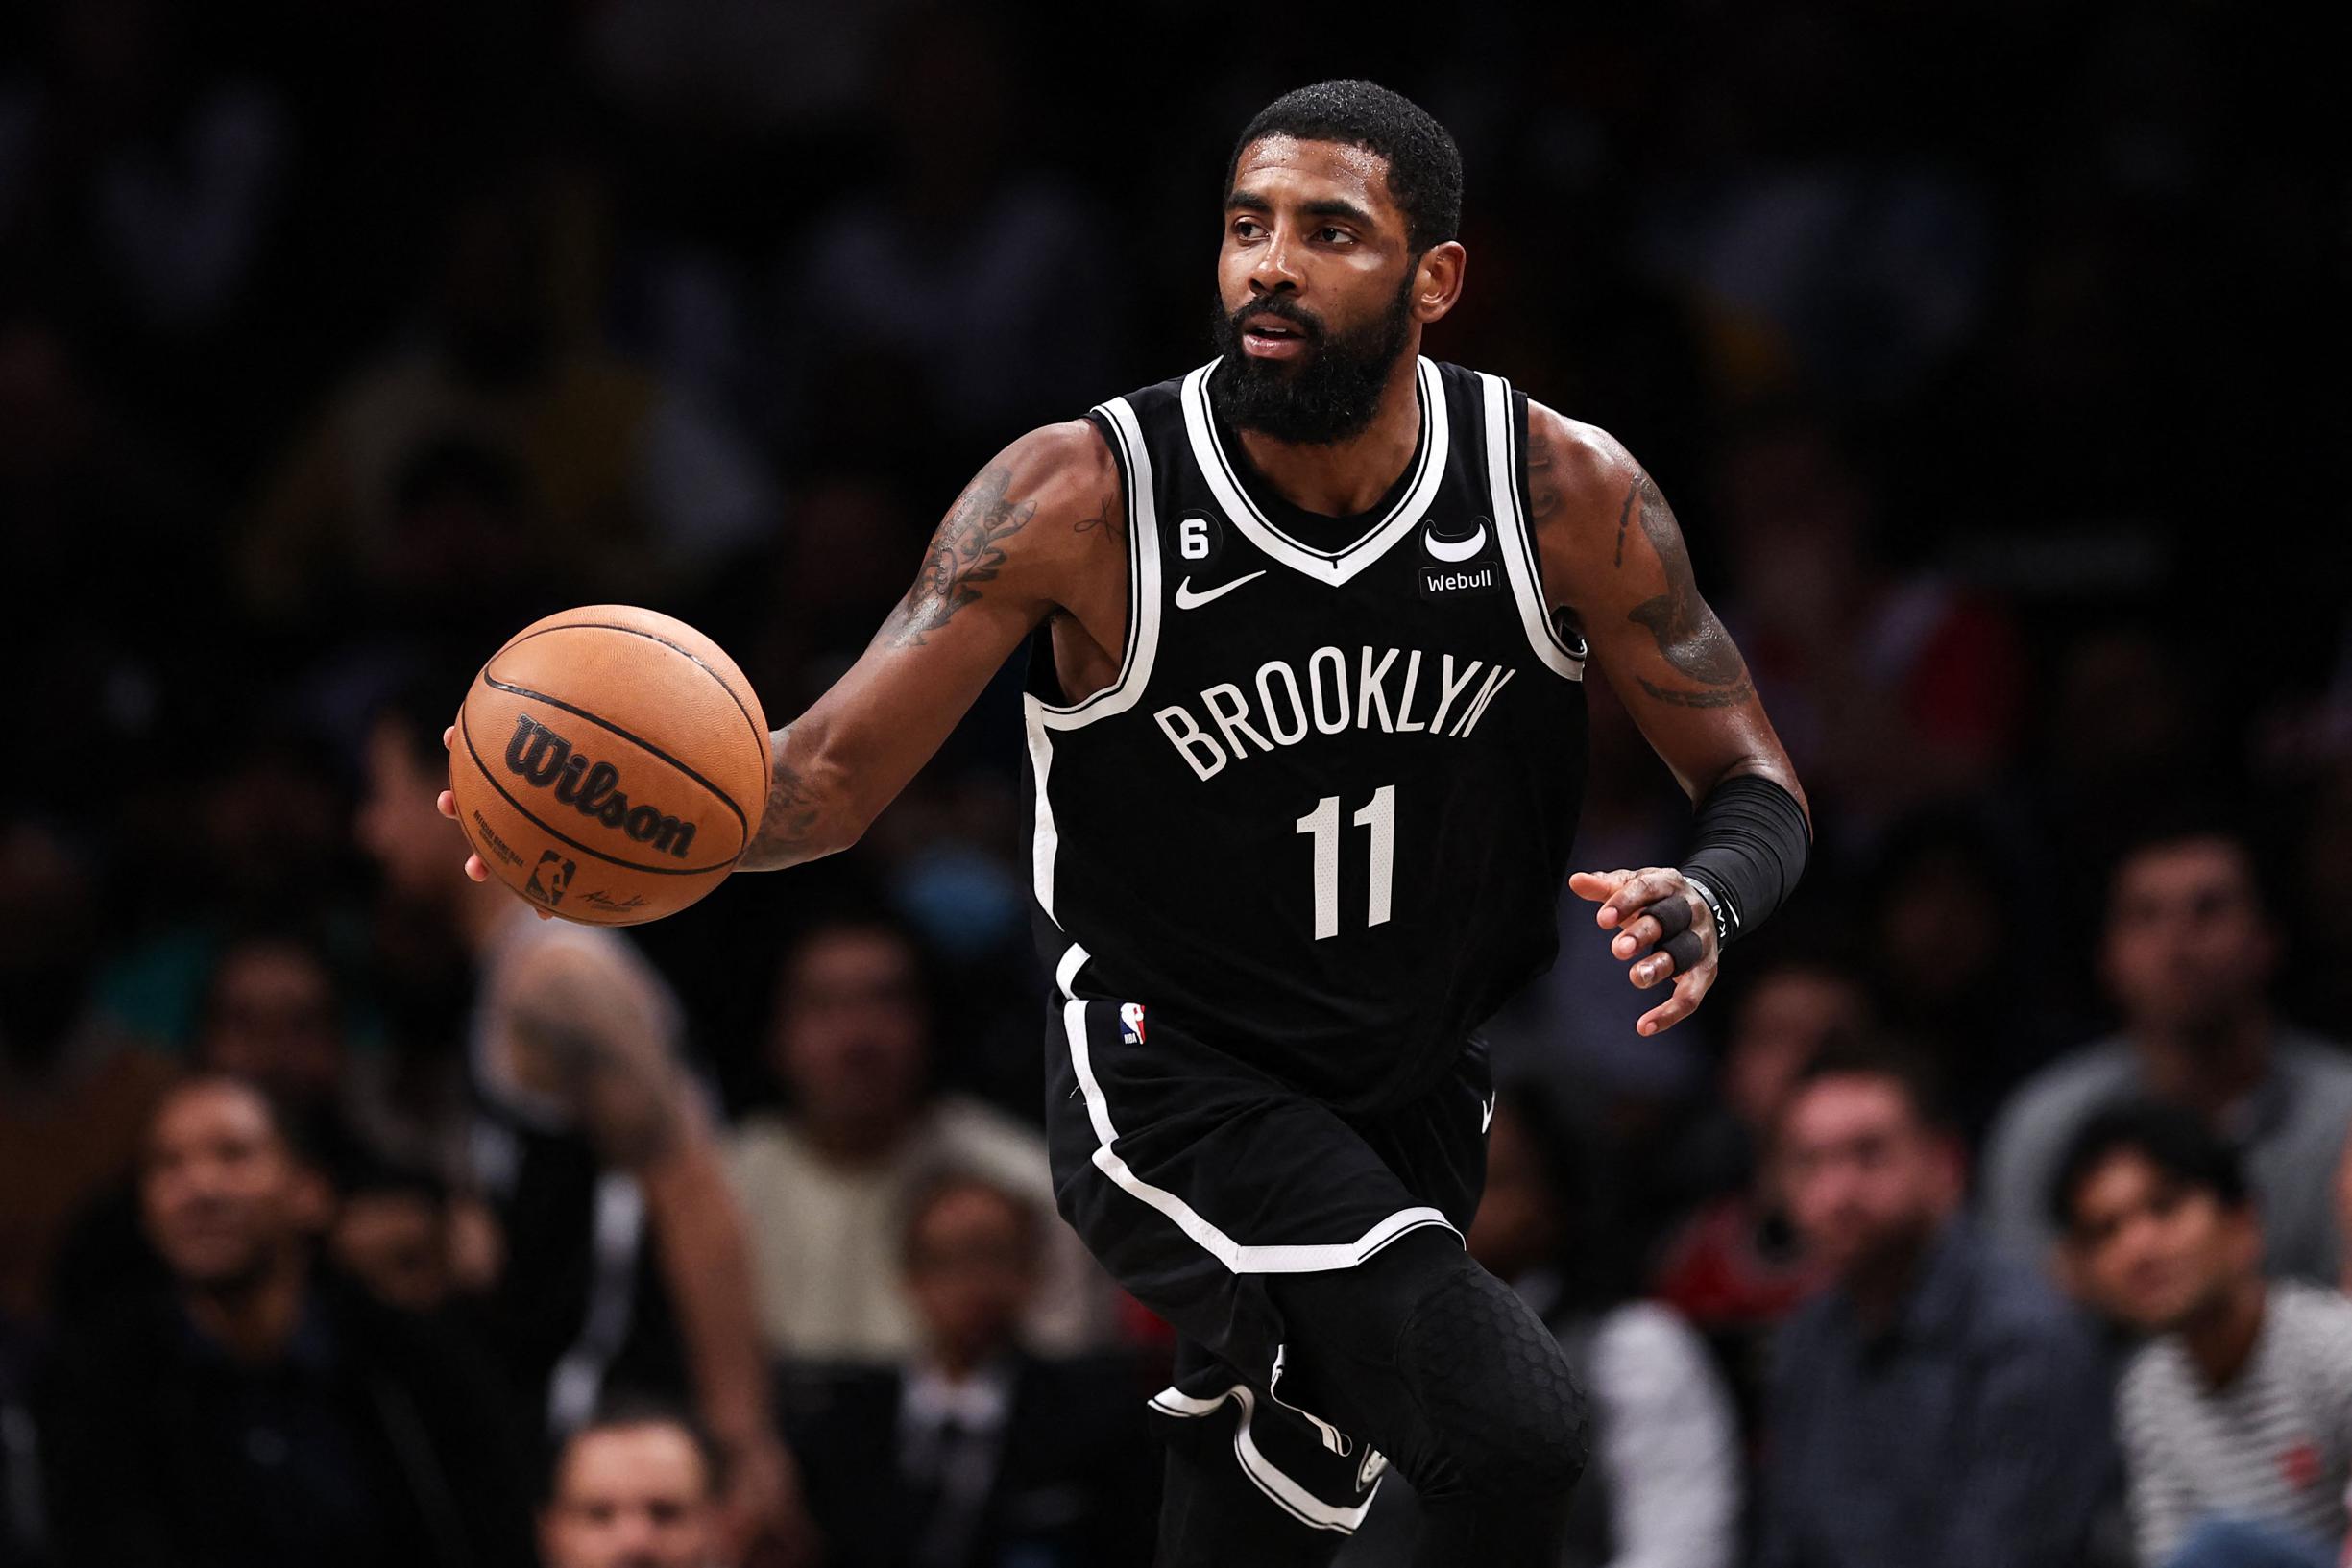 Basketball player Kyrie Irving has been suspended by the team for promoting an anti-Semitic film